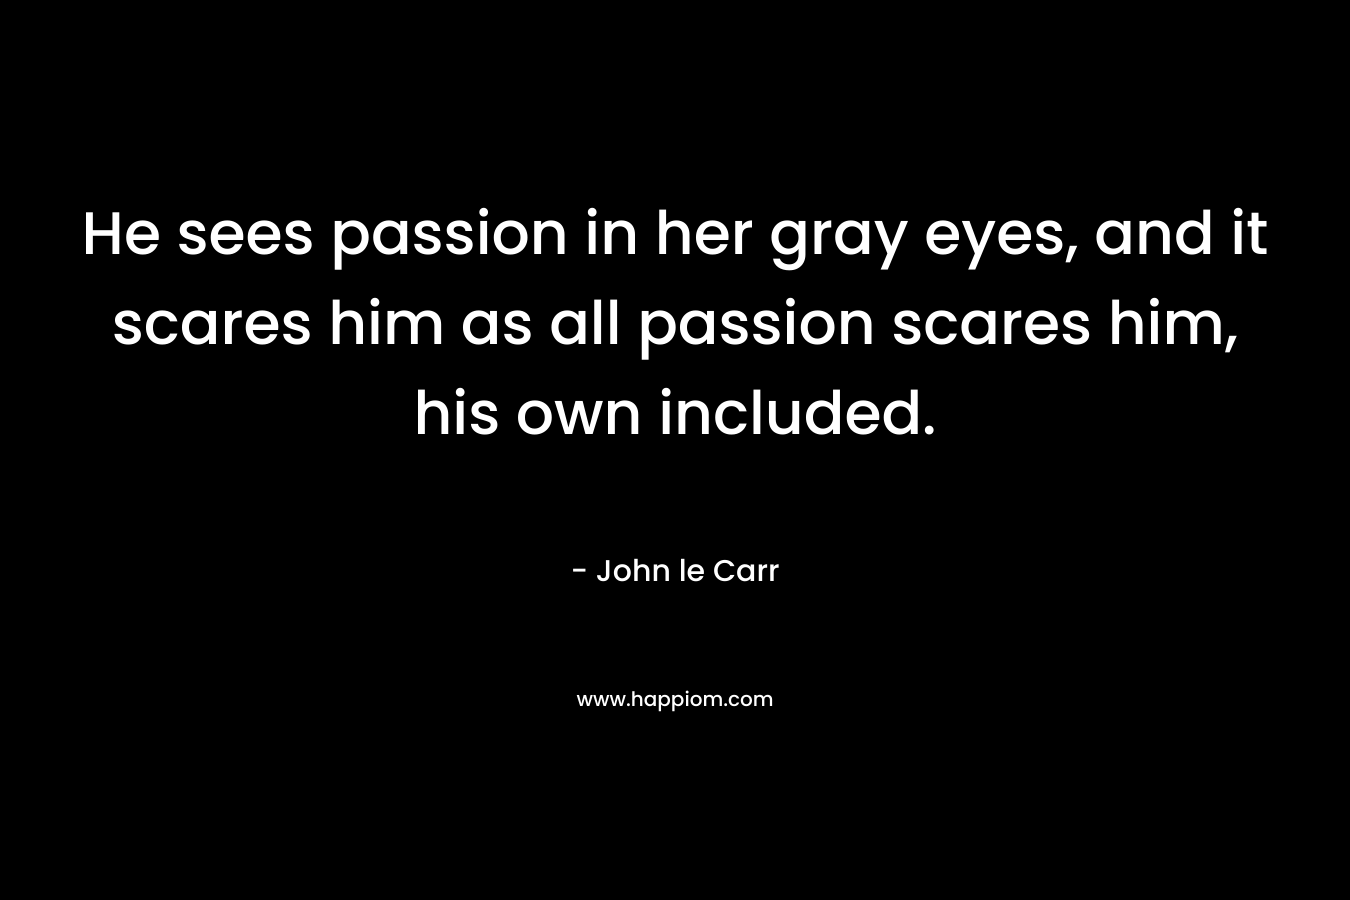 He sees passion in her gray eyes, and it scares him as all passion scares him, his own included.